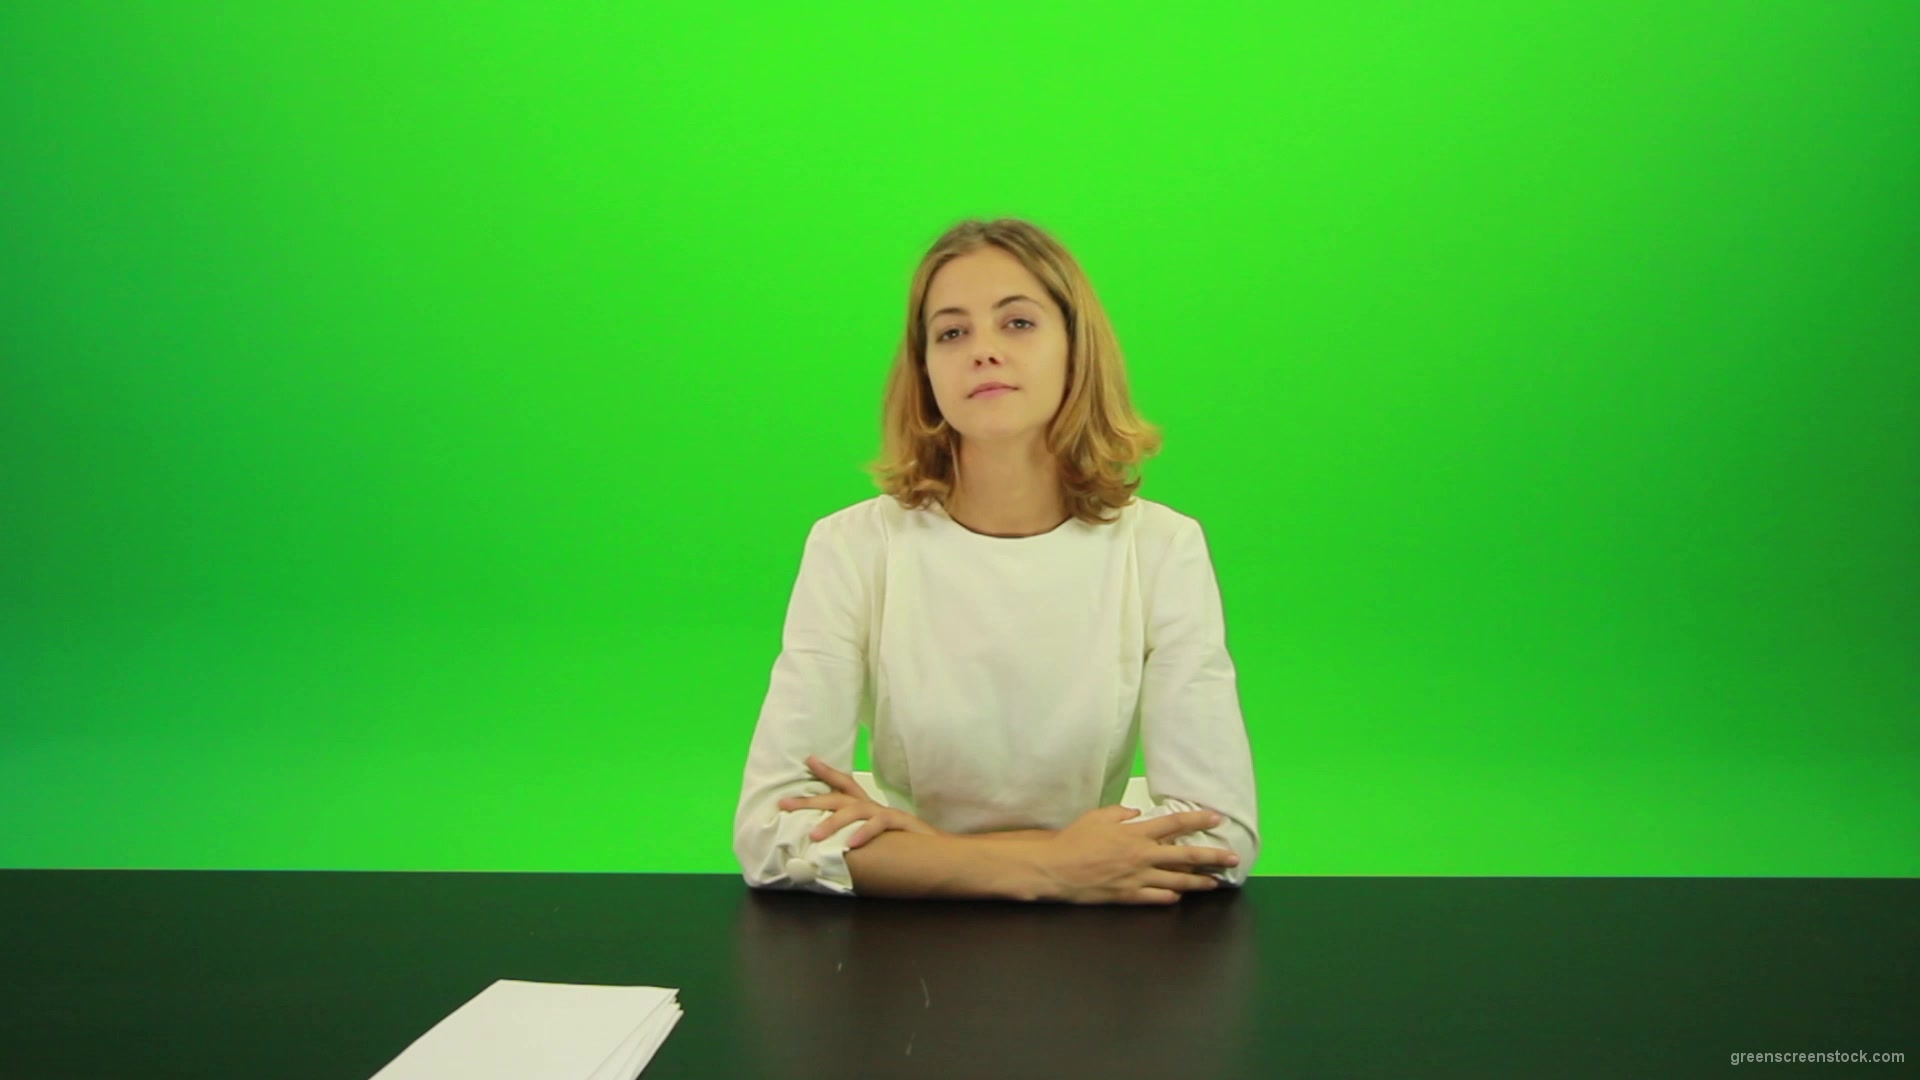 Blonde-hair-girl-in-white-shirt-give-3-point-mark-score-Full-HD-Green-Screen-Video-Footage_009 Green Screen Stock